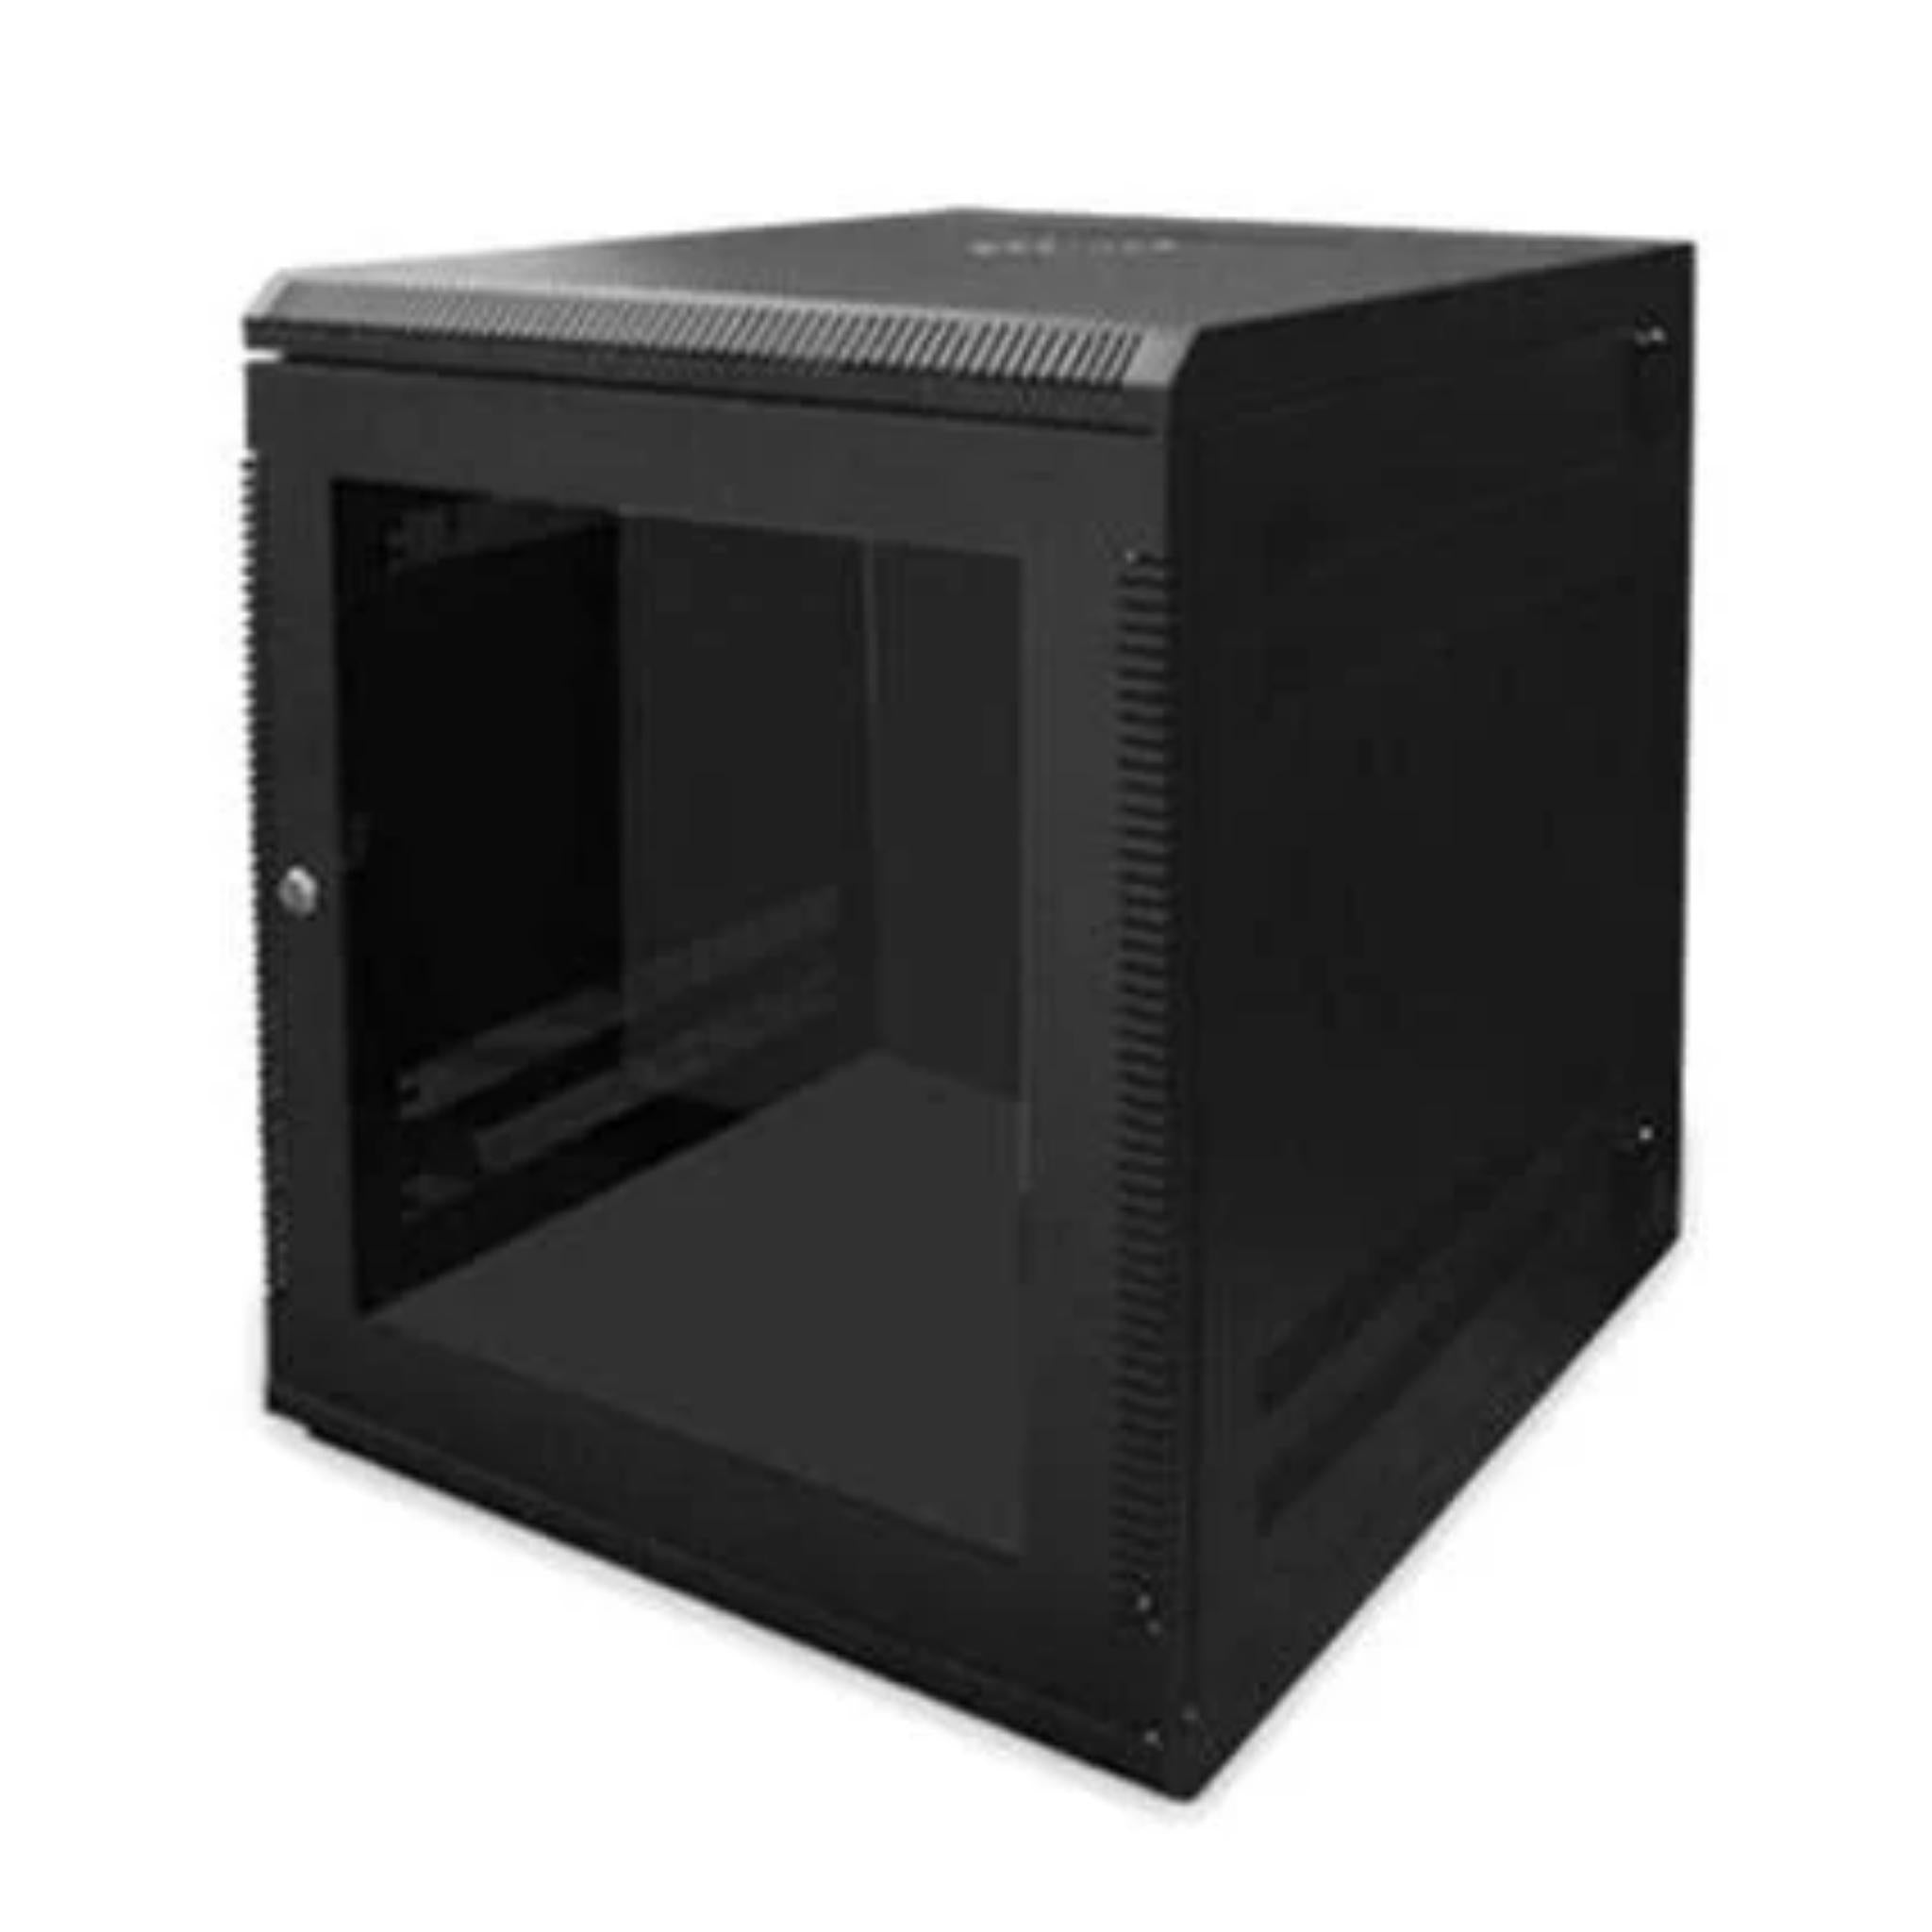 Premium 12U Network Server Rack with Heavy Duty Steel Frame, Tempered Glass Door, and Reversible Handing for Enhanced Cooling